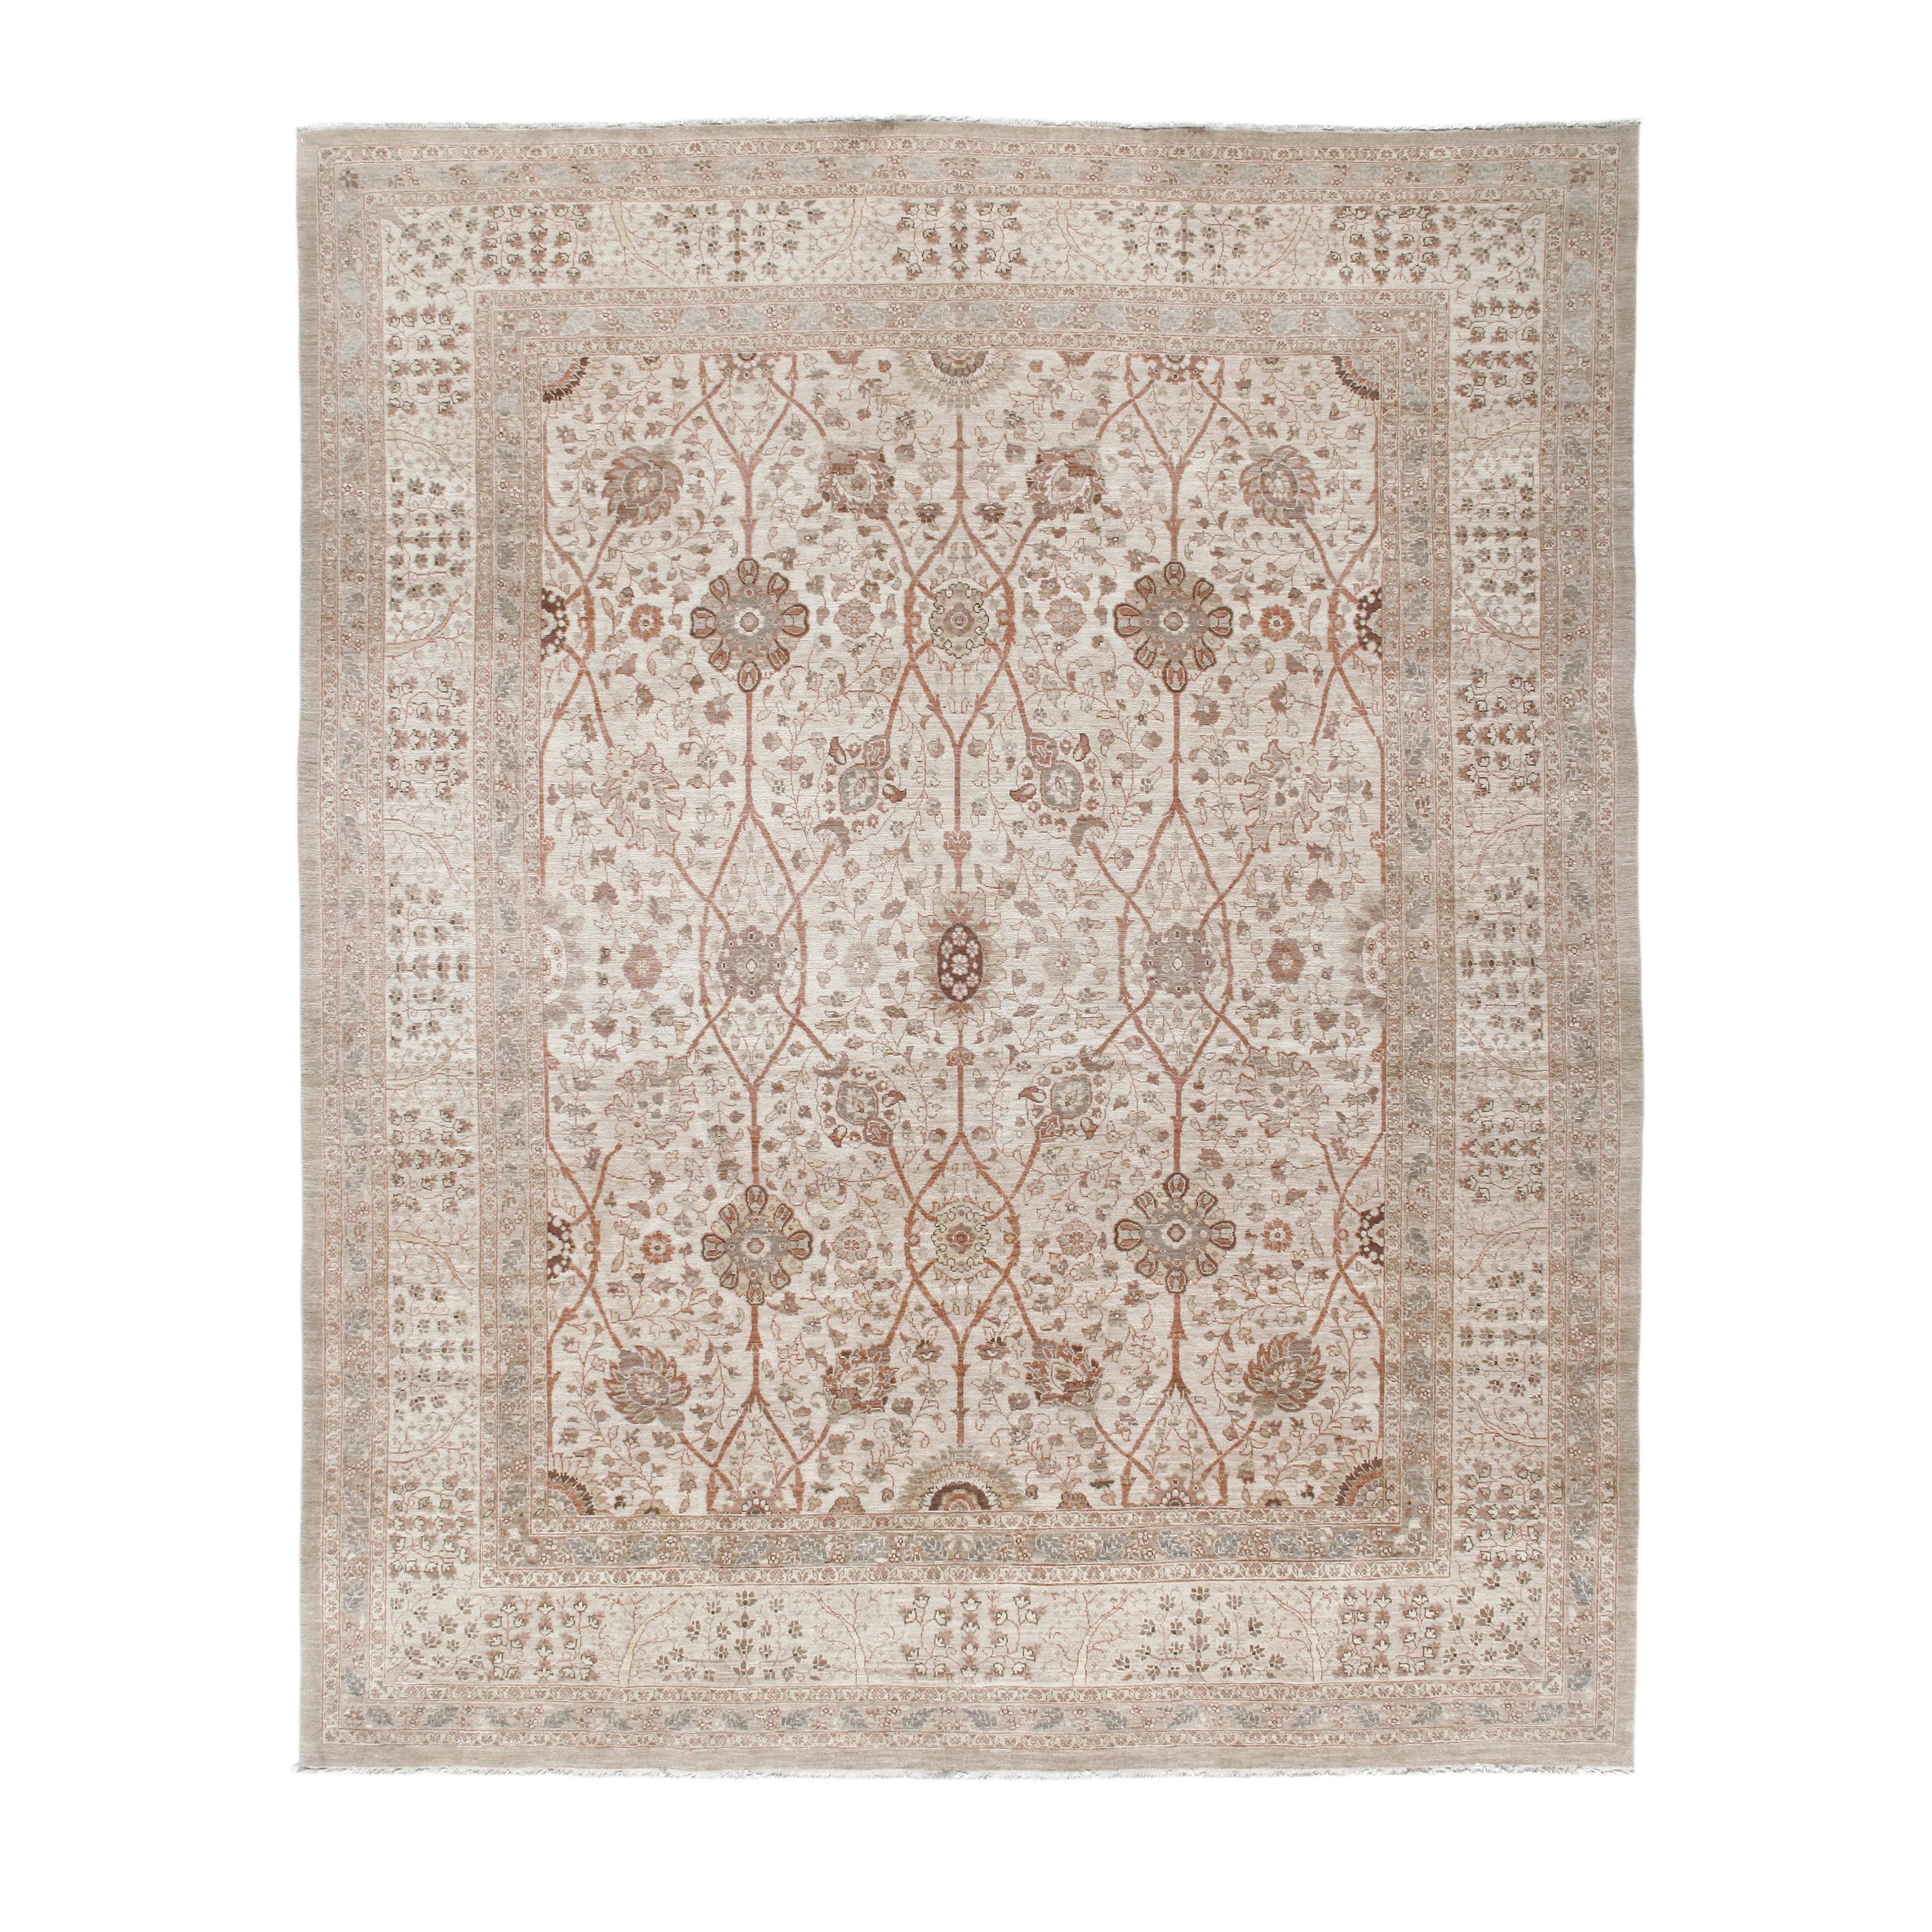 This Persian Tabriz rug is made with Persian Hand carded wool and natural dye.